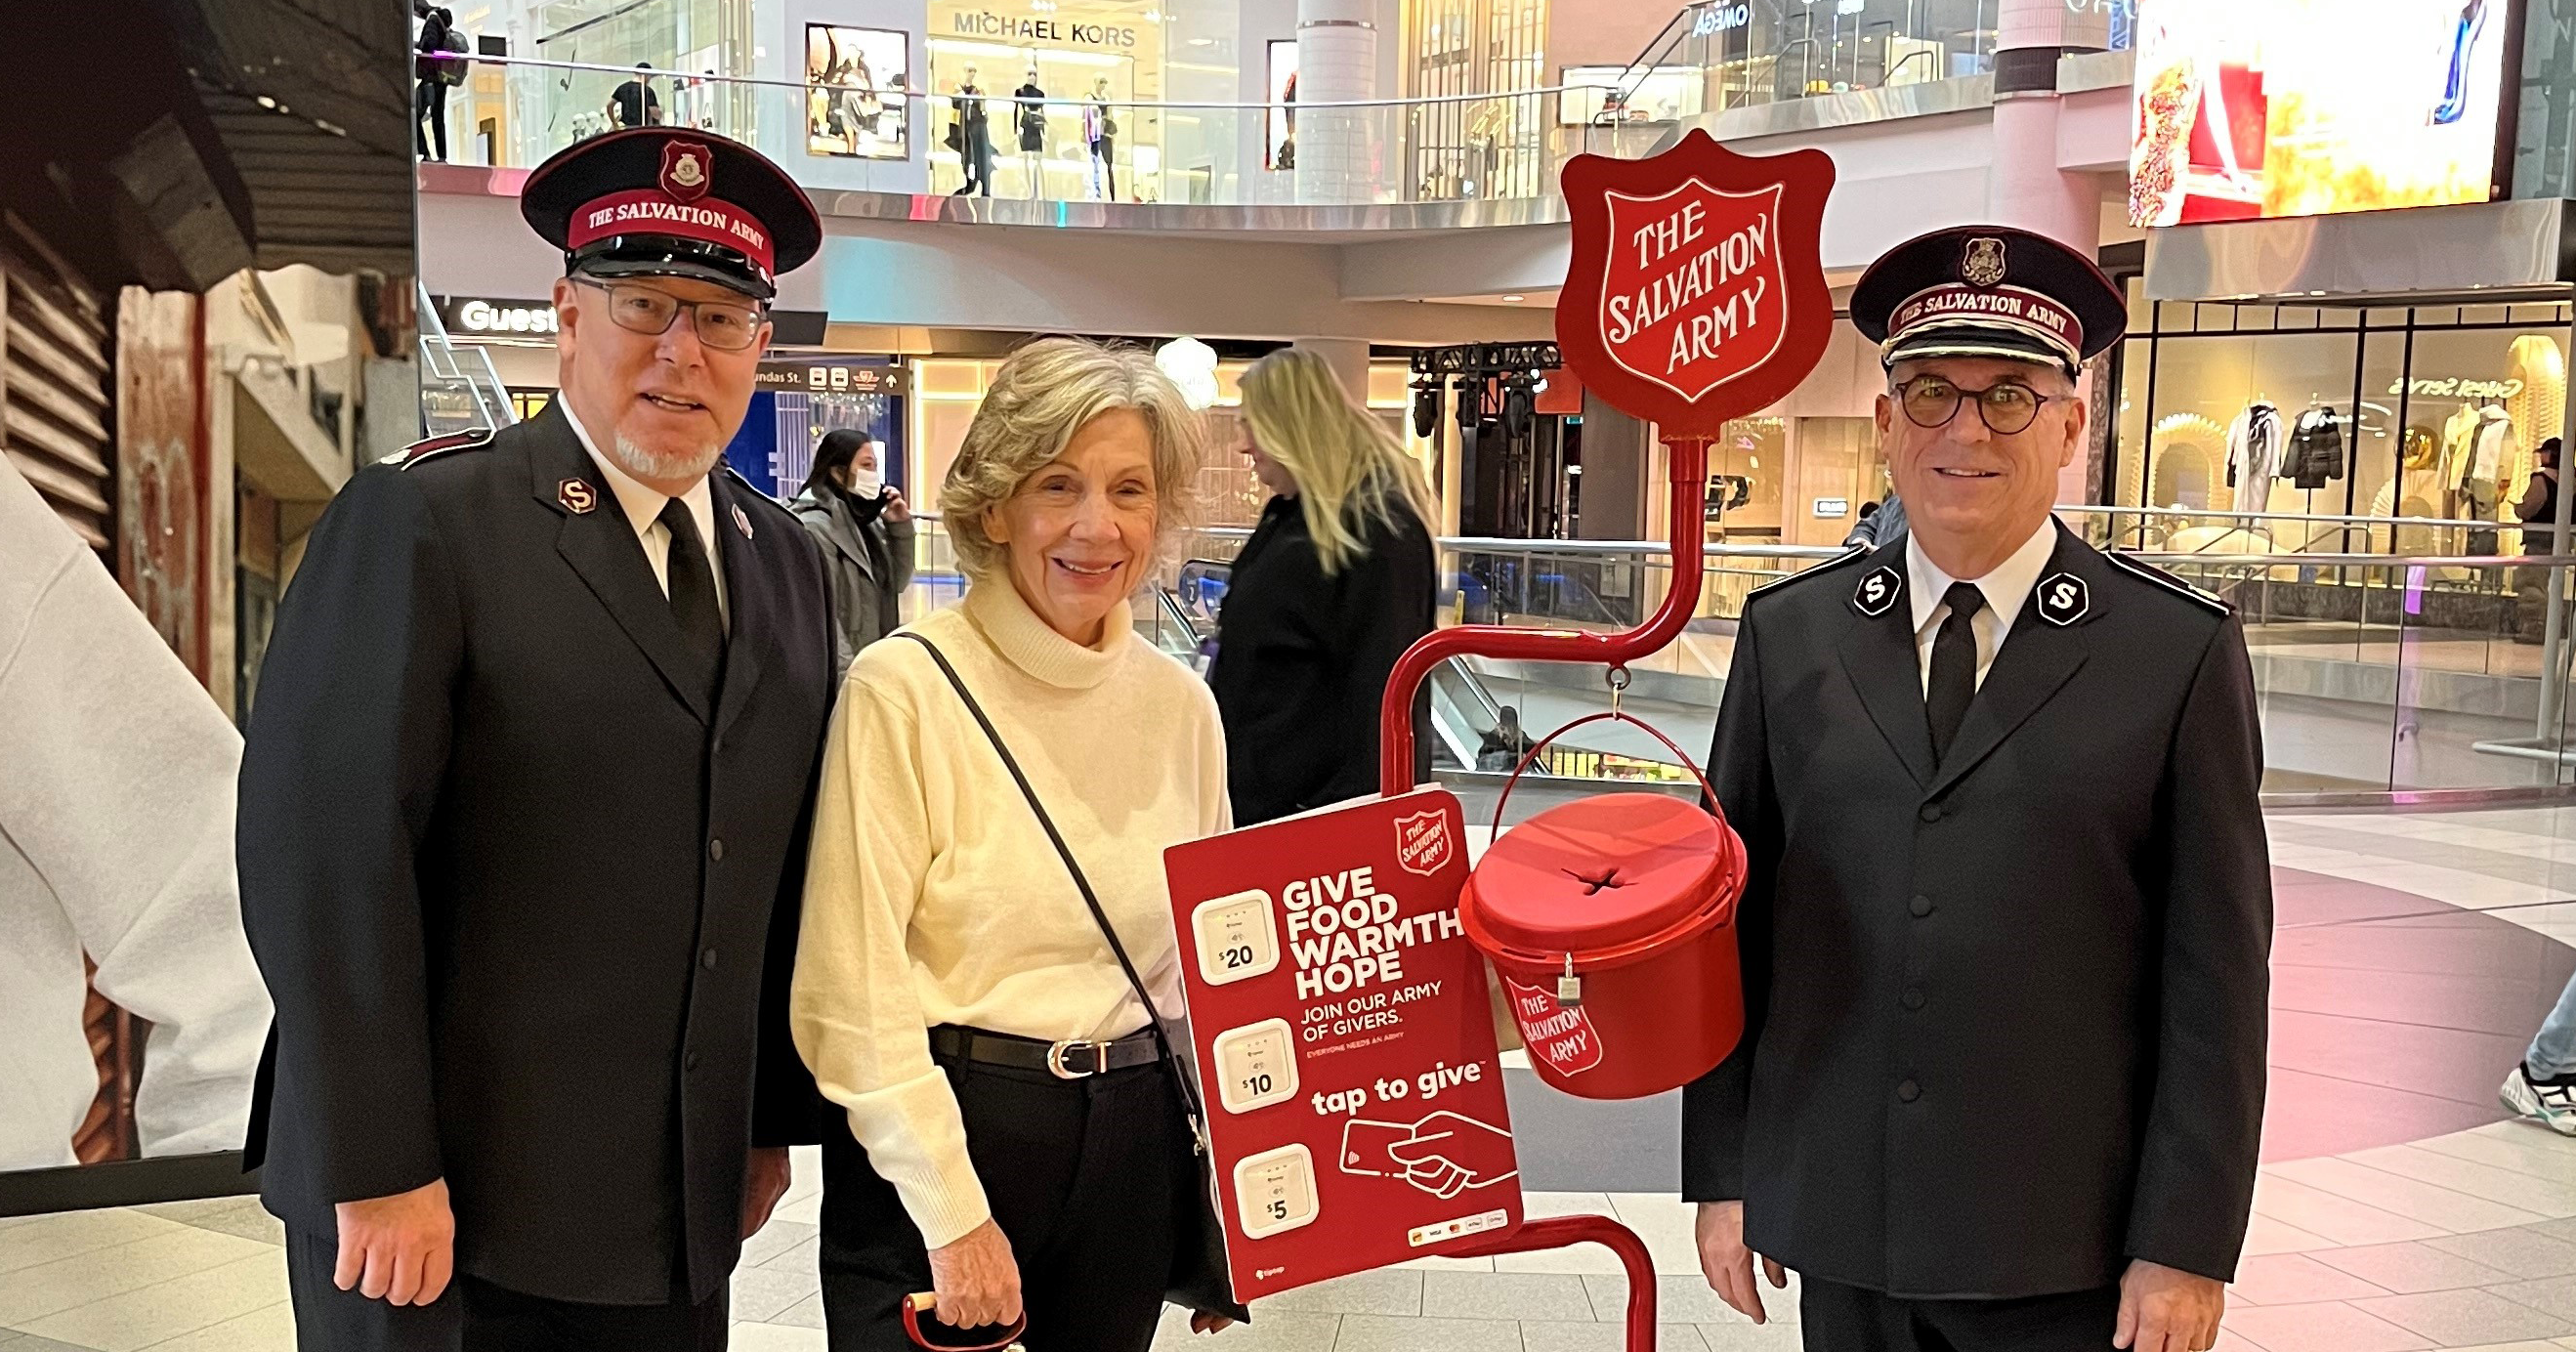 Susan Waterfield, a member of the National Advisory Board, rings kettle bells at the Eaton Centre in Toronto, accompanied by Lt-Col John Murray (left) and Commissioner Floyd Tidd, territorial commander